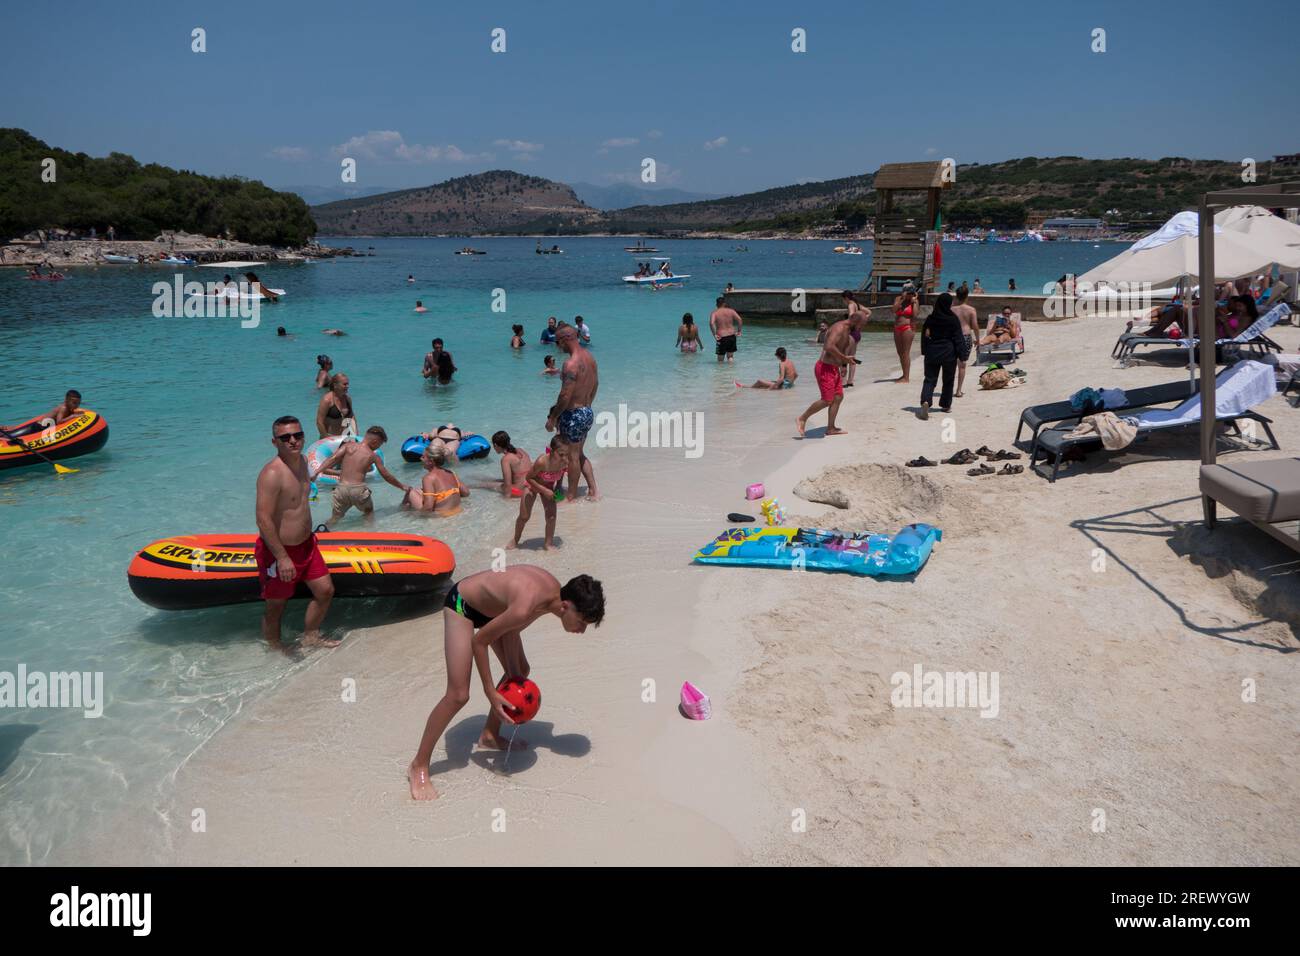 View of crowded beach in Ksamil, Albania with people swimming and having fun near 3 Ishujt resort. Tourists enjoying summer in Albanian destination Stock Photo